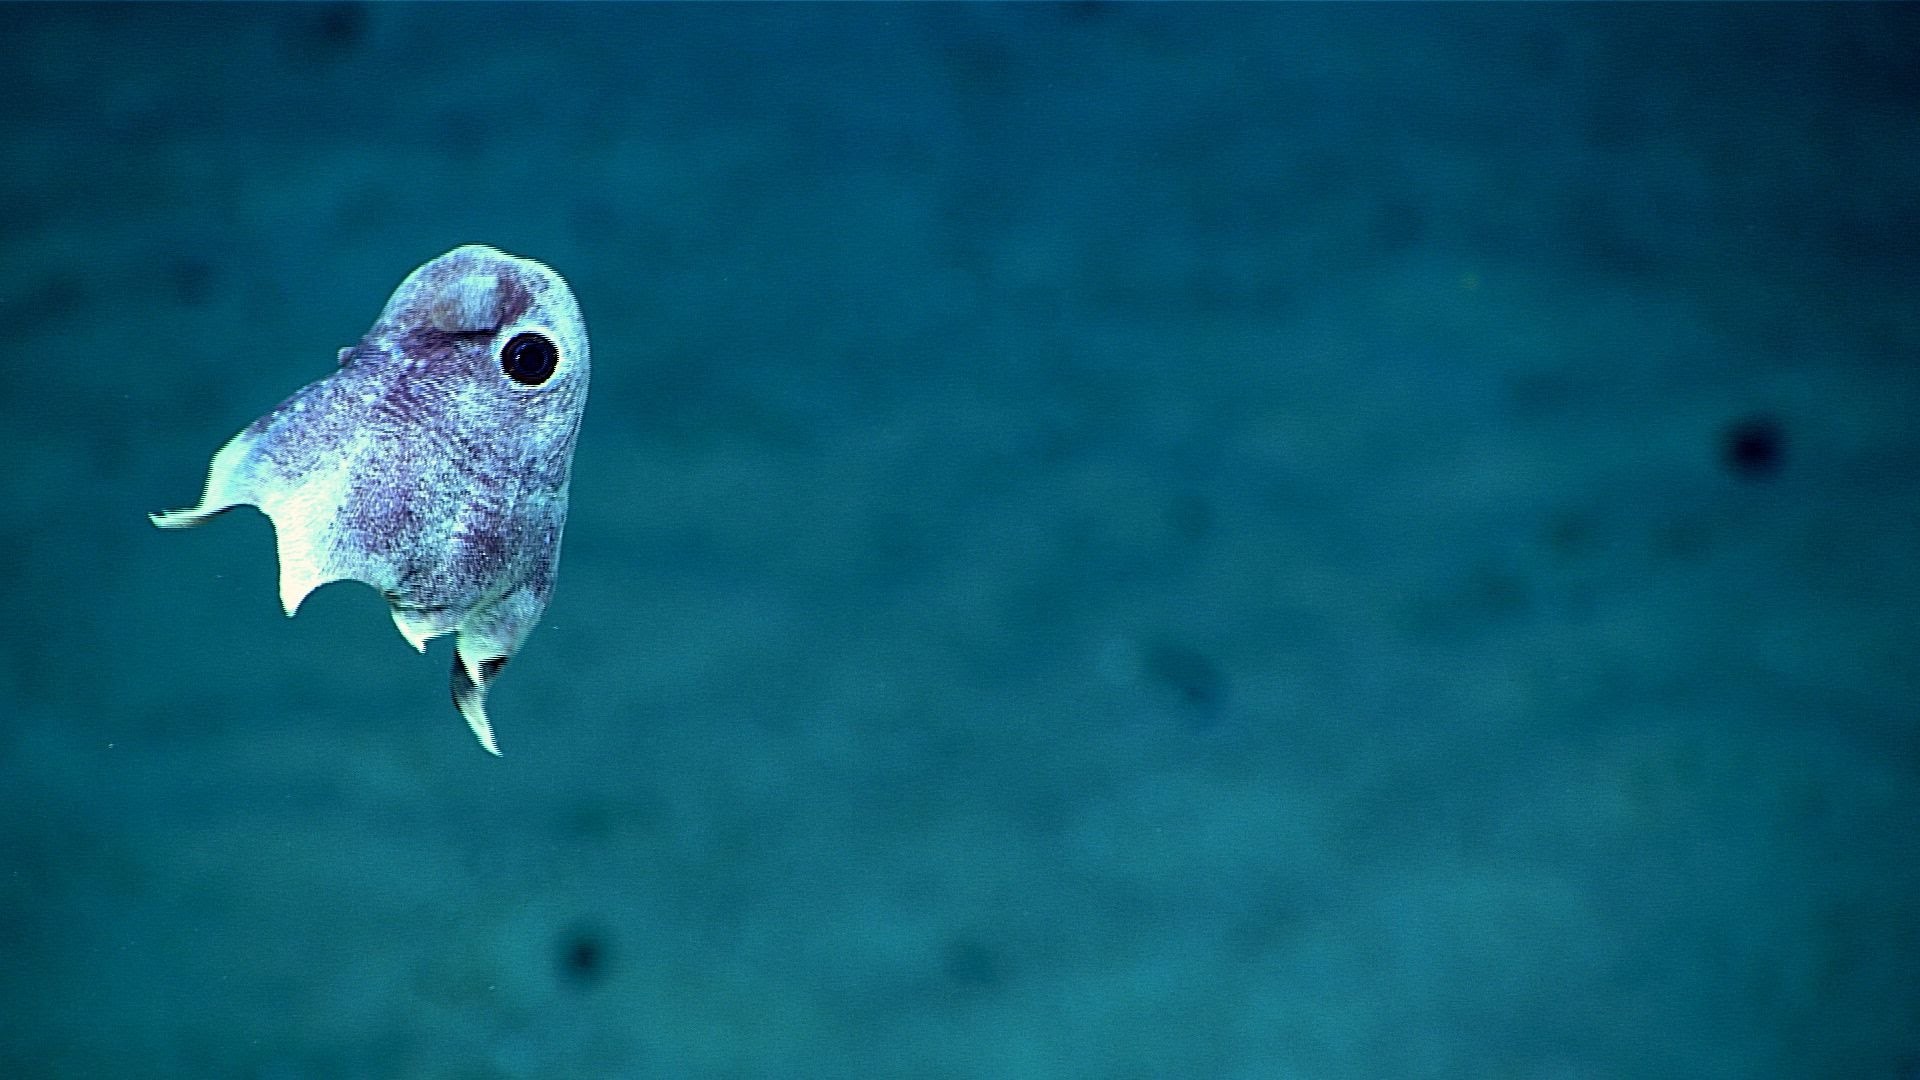 1920x1080 Scientists just captured stunning images of deep sea creatures - YouTube